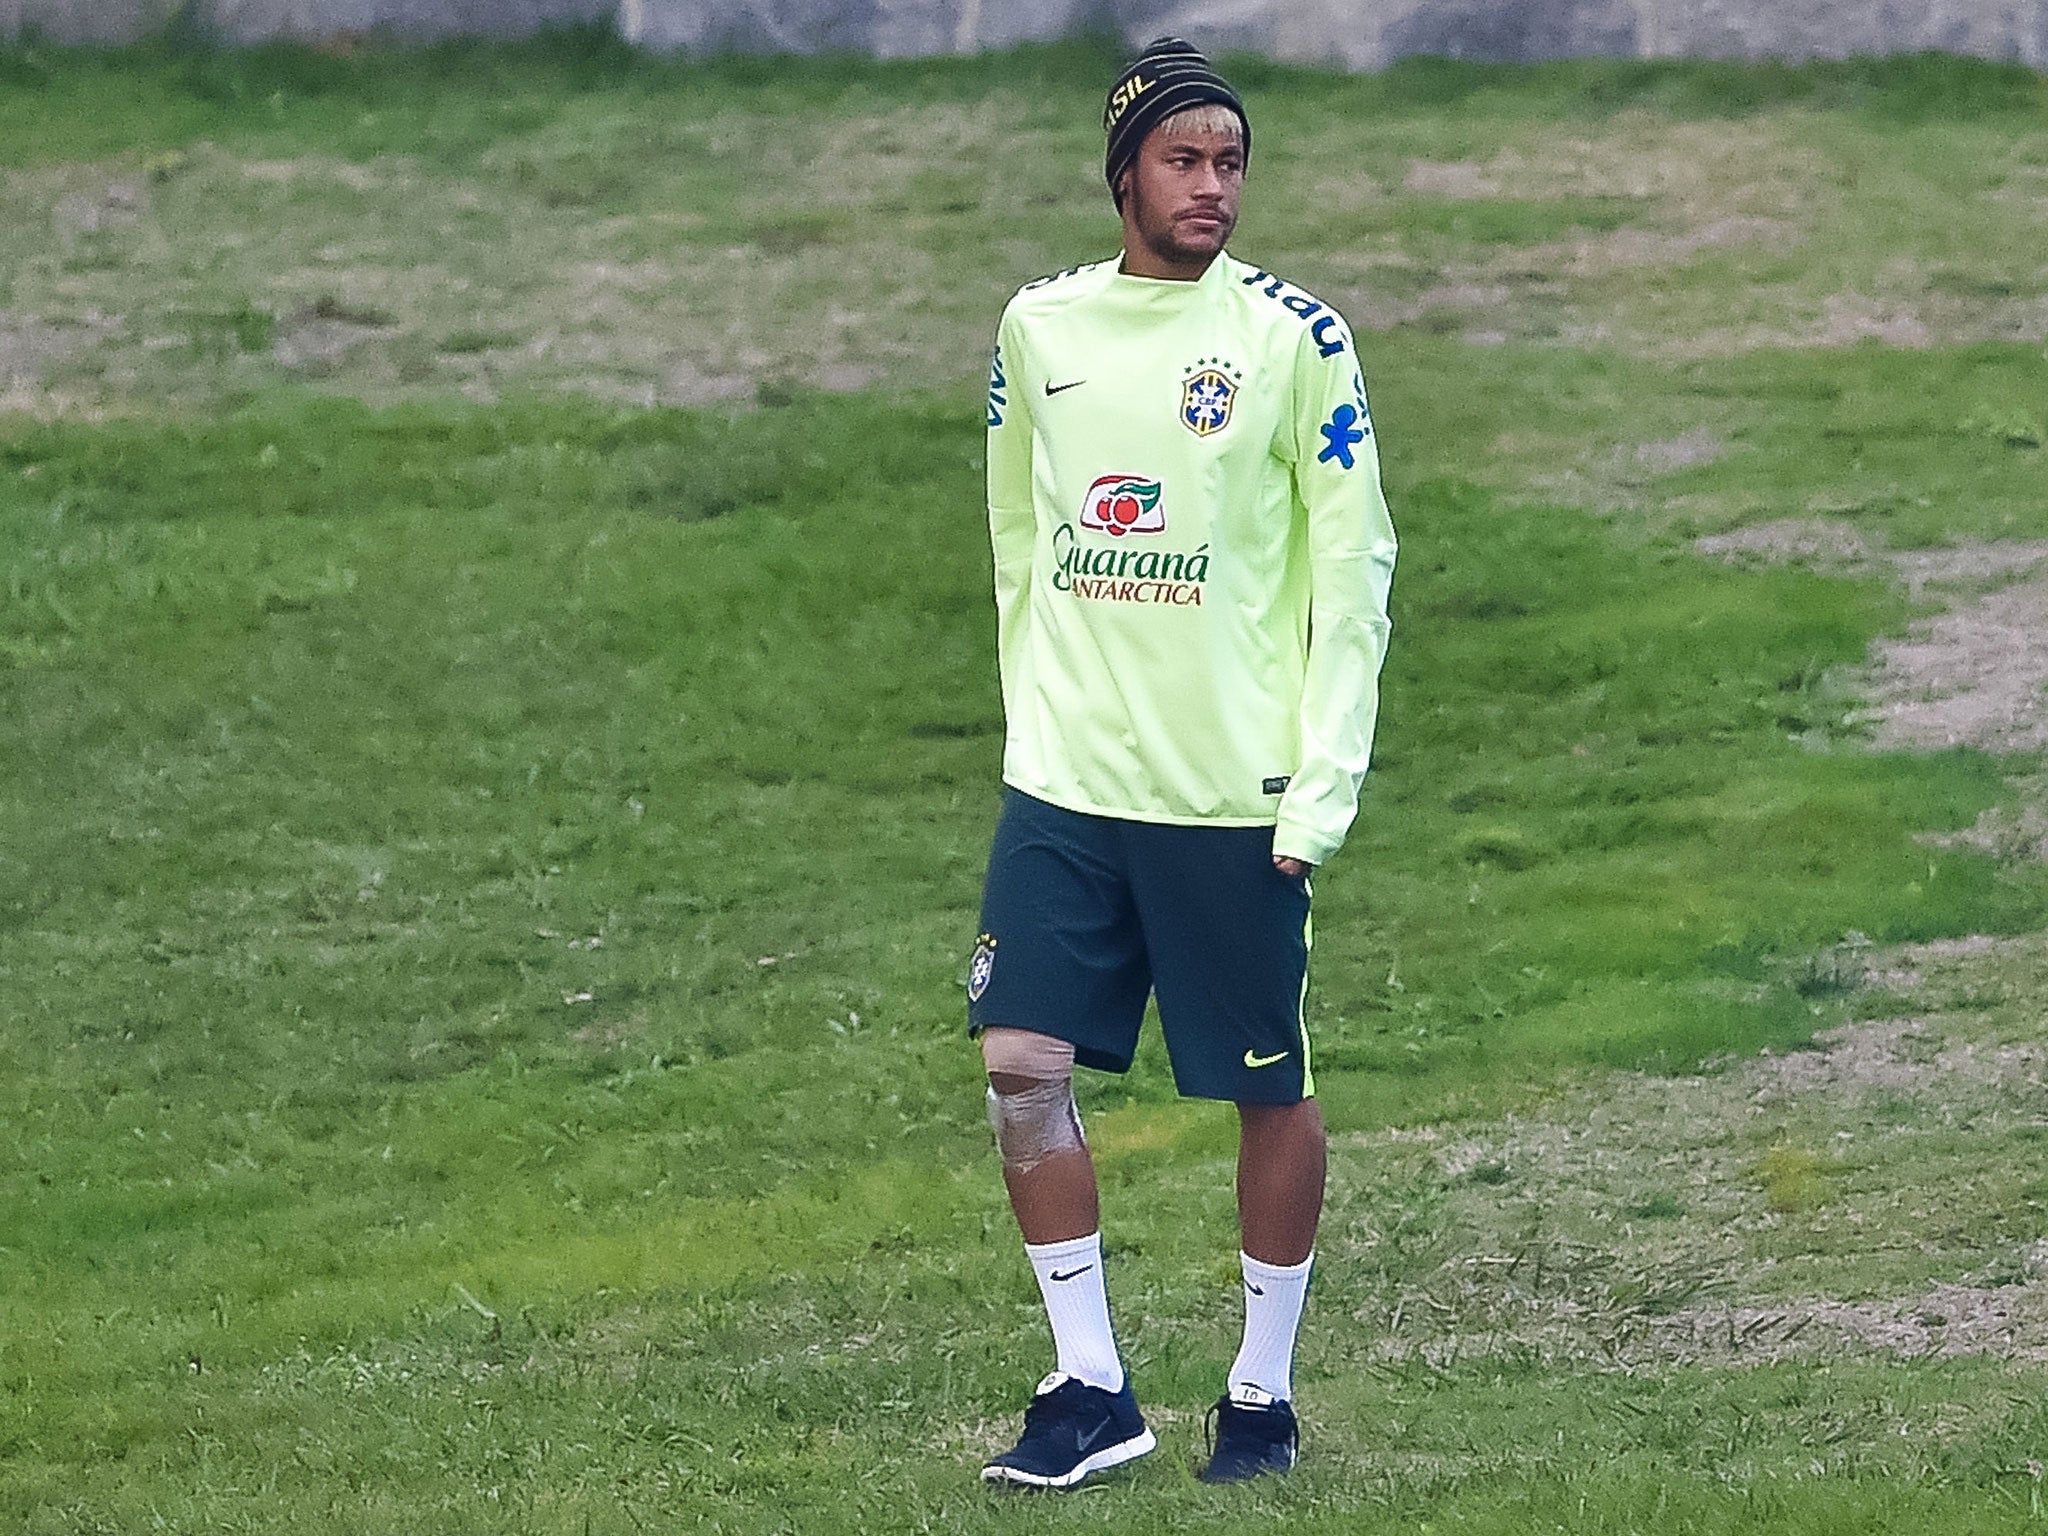 Neymar attends a Brazil training session with him right knee strapped up